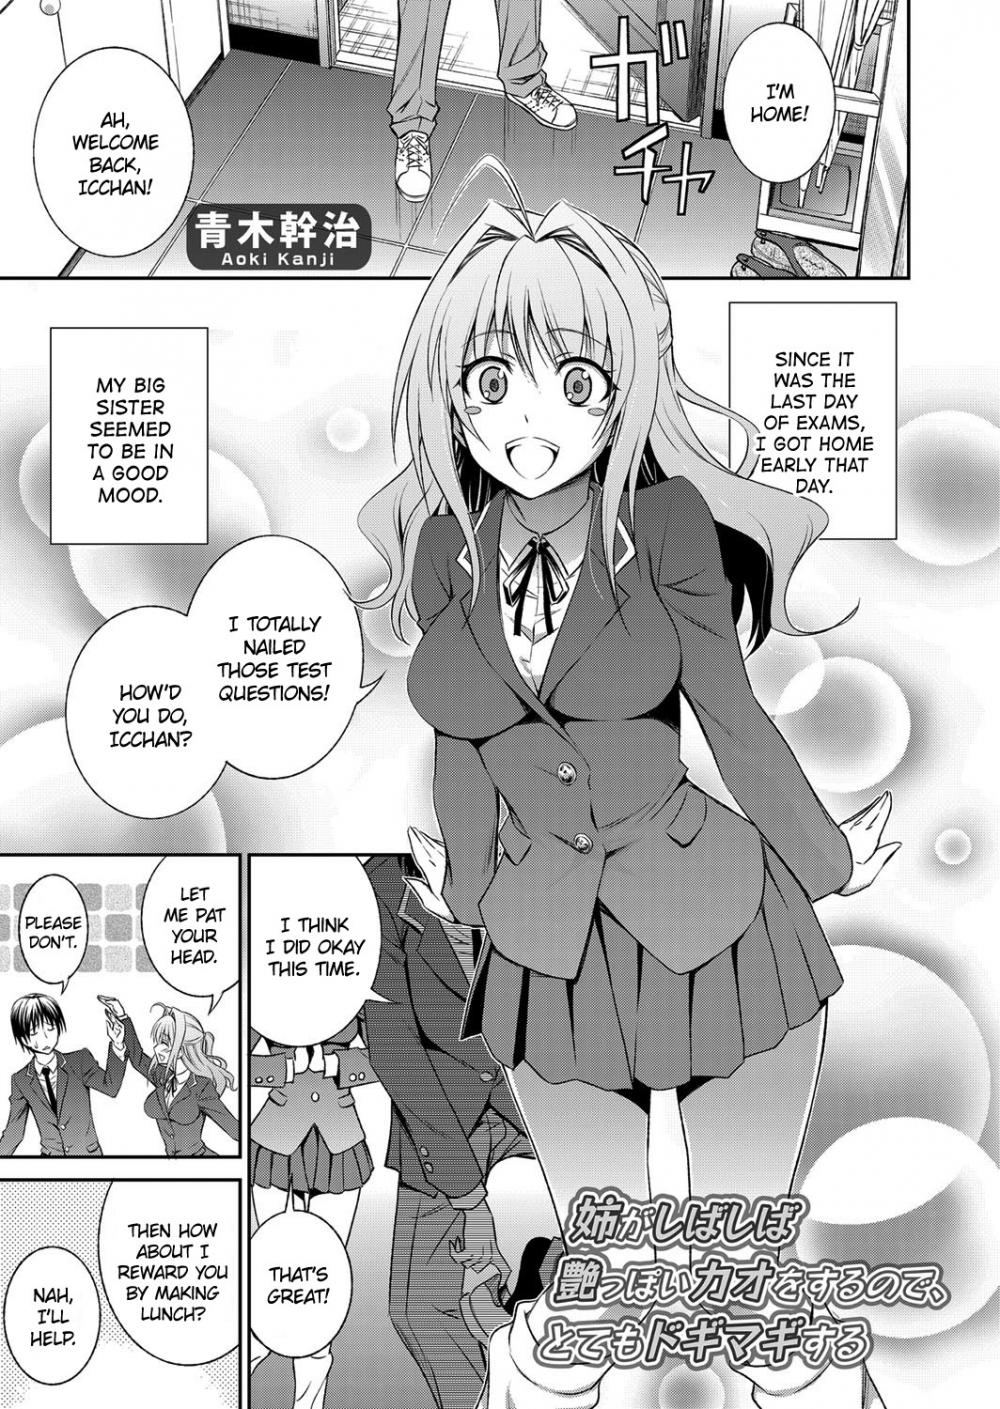 Hentai Manga Comic-My Big Sister often has an Amorous Look on Her Face, and that makes Me Very Nervous-Read-1